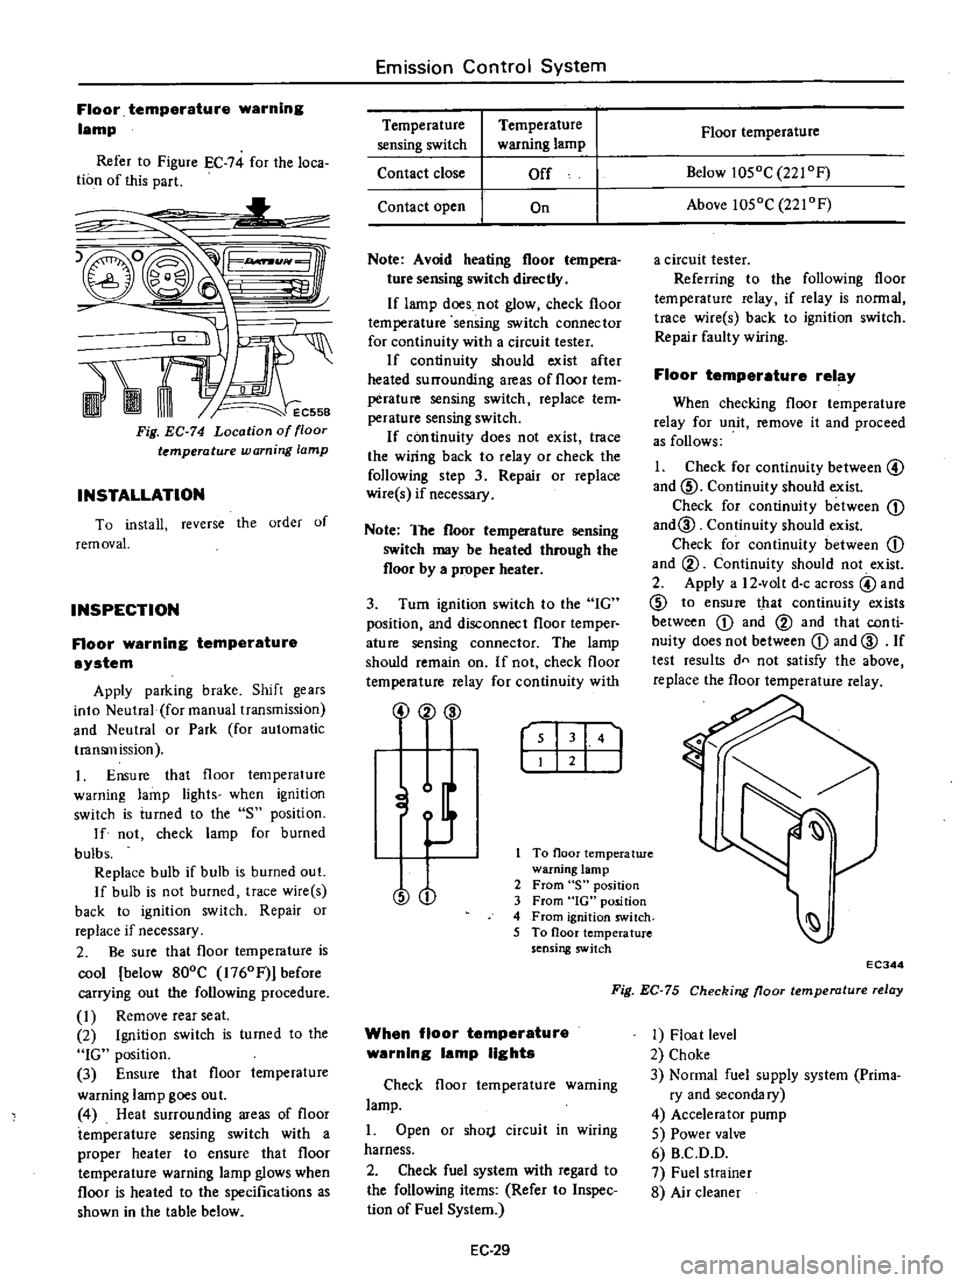 DATSUN PICK-UP 1977  Service Manual 
Floor 
temparature 
warning

lamp

Refer

to

Figure 
EC 
74

for 
the

loca

tion 
of 
this

part

L

1t

1

RAt

Fig 
EC 
74 
Location 
of 
floor

temperature 
warning 
lamp

INSTALLATION

To 
inst